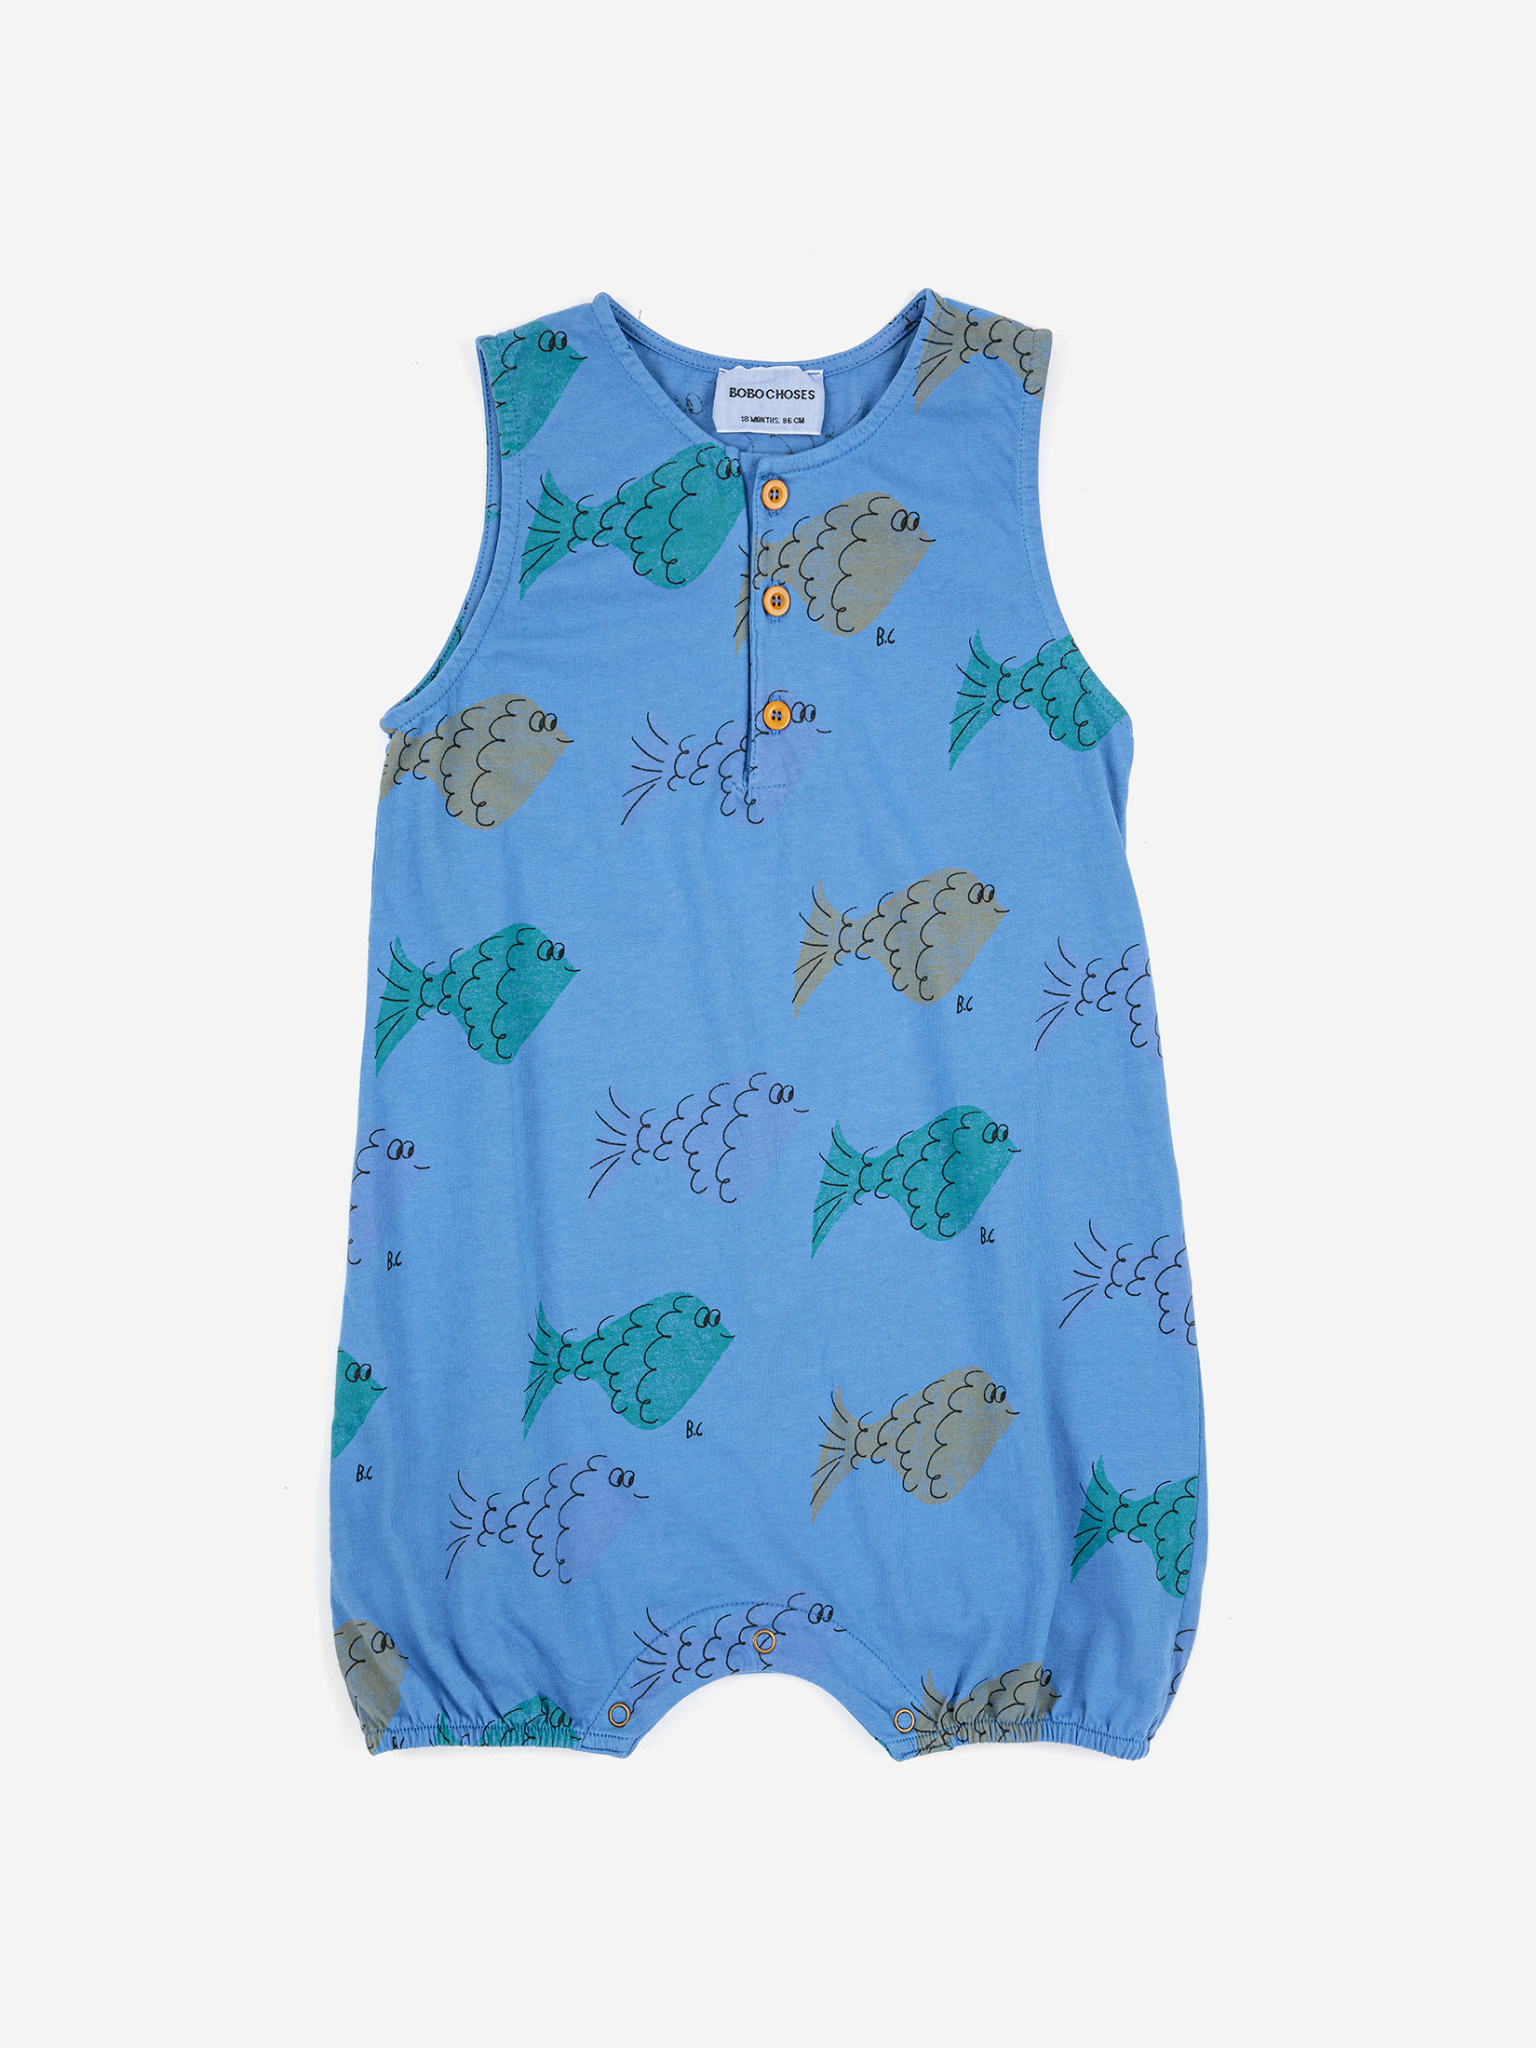 Bobo choses - Multicolor Fish all over playsuit - 3 month-1